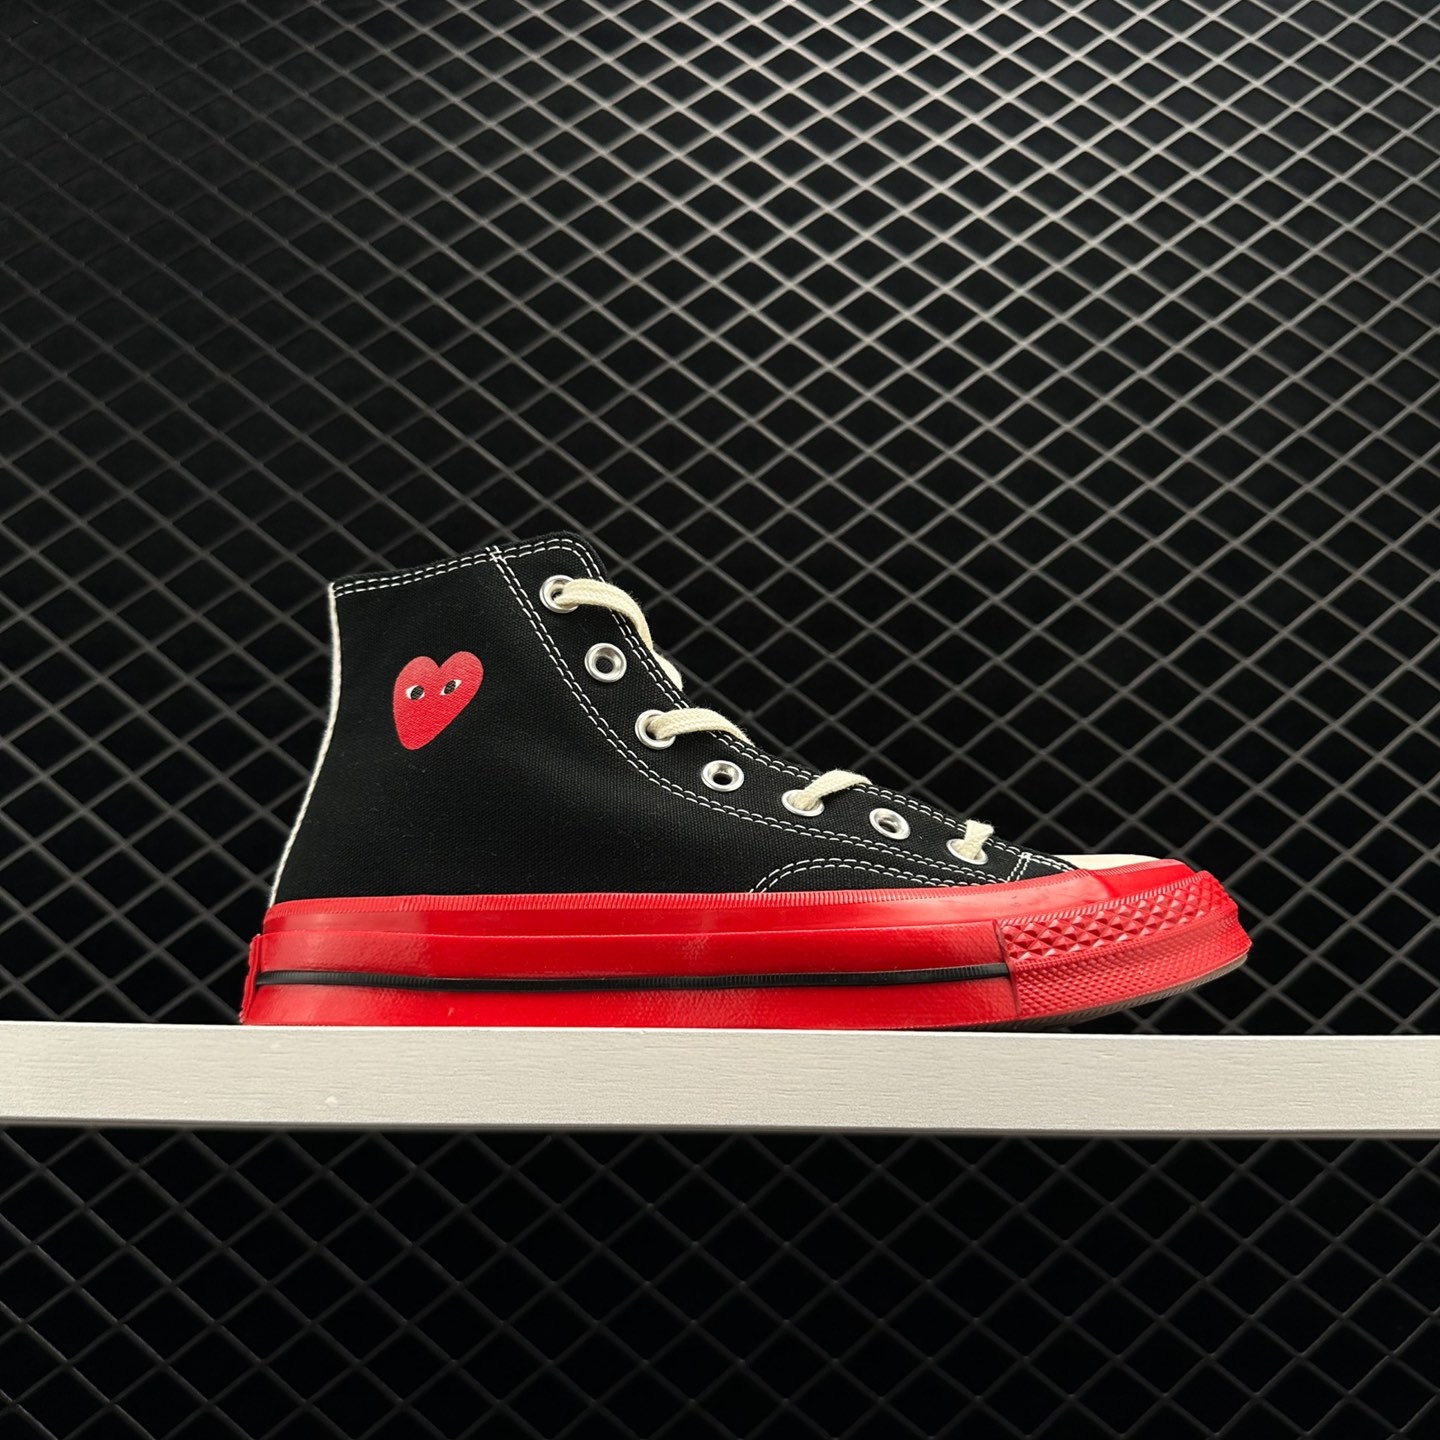 Converse Comme des Play x Chuck 70 High 'Black Red' A01793C - Stylish Collaboration Sneakers